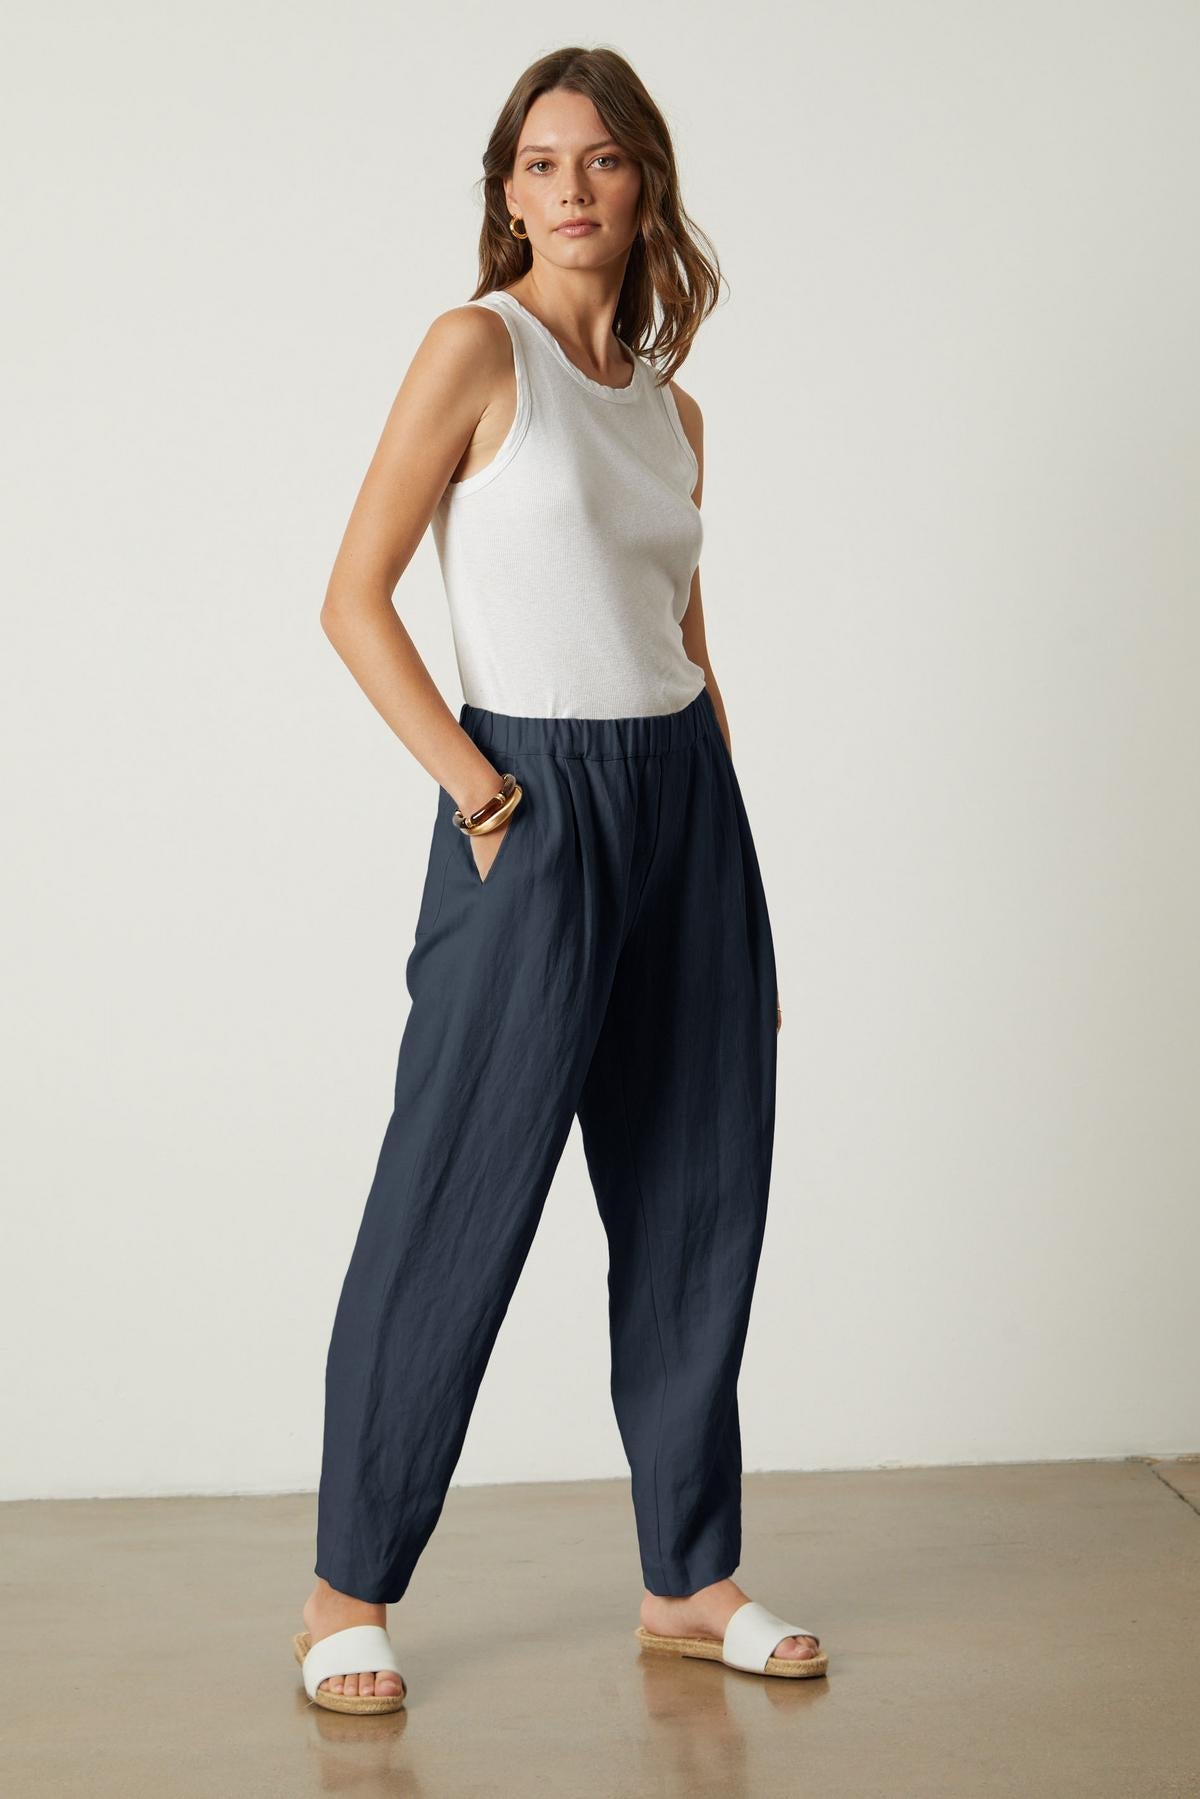 The model is wearing a white tank top and Velvet by Graham & Spencer navy linen trousers, showcasing the drape and texture of the lightweight fabric of the JESSIE HEAVY LINEN PANT.-35921336369345